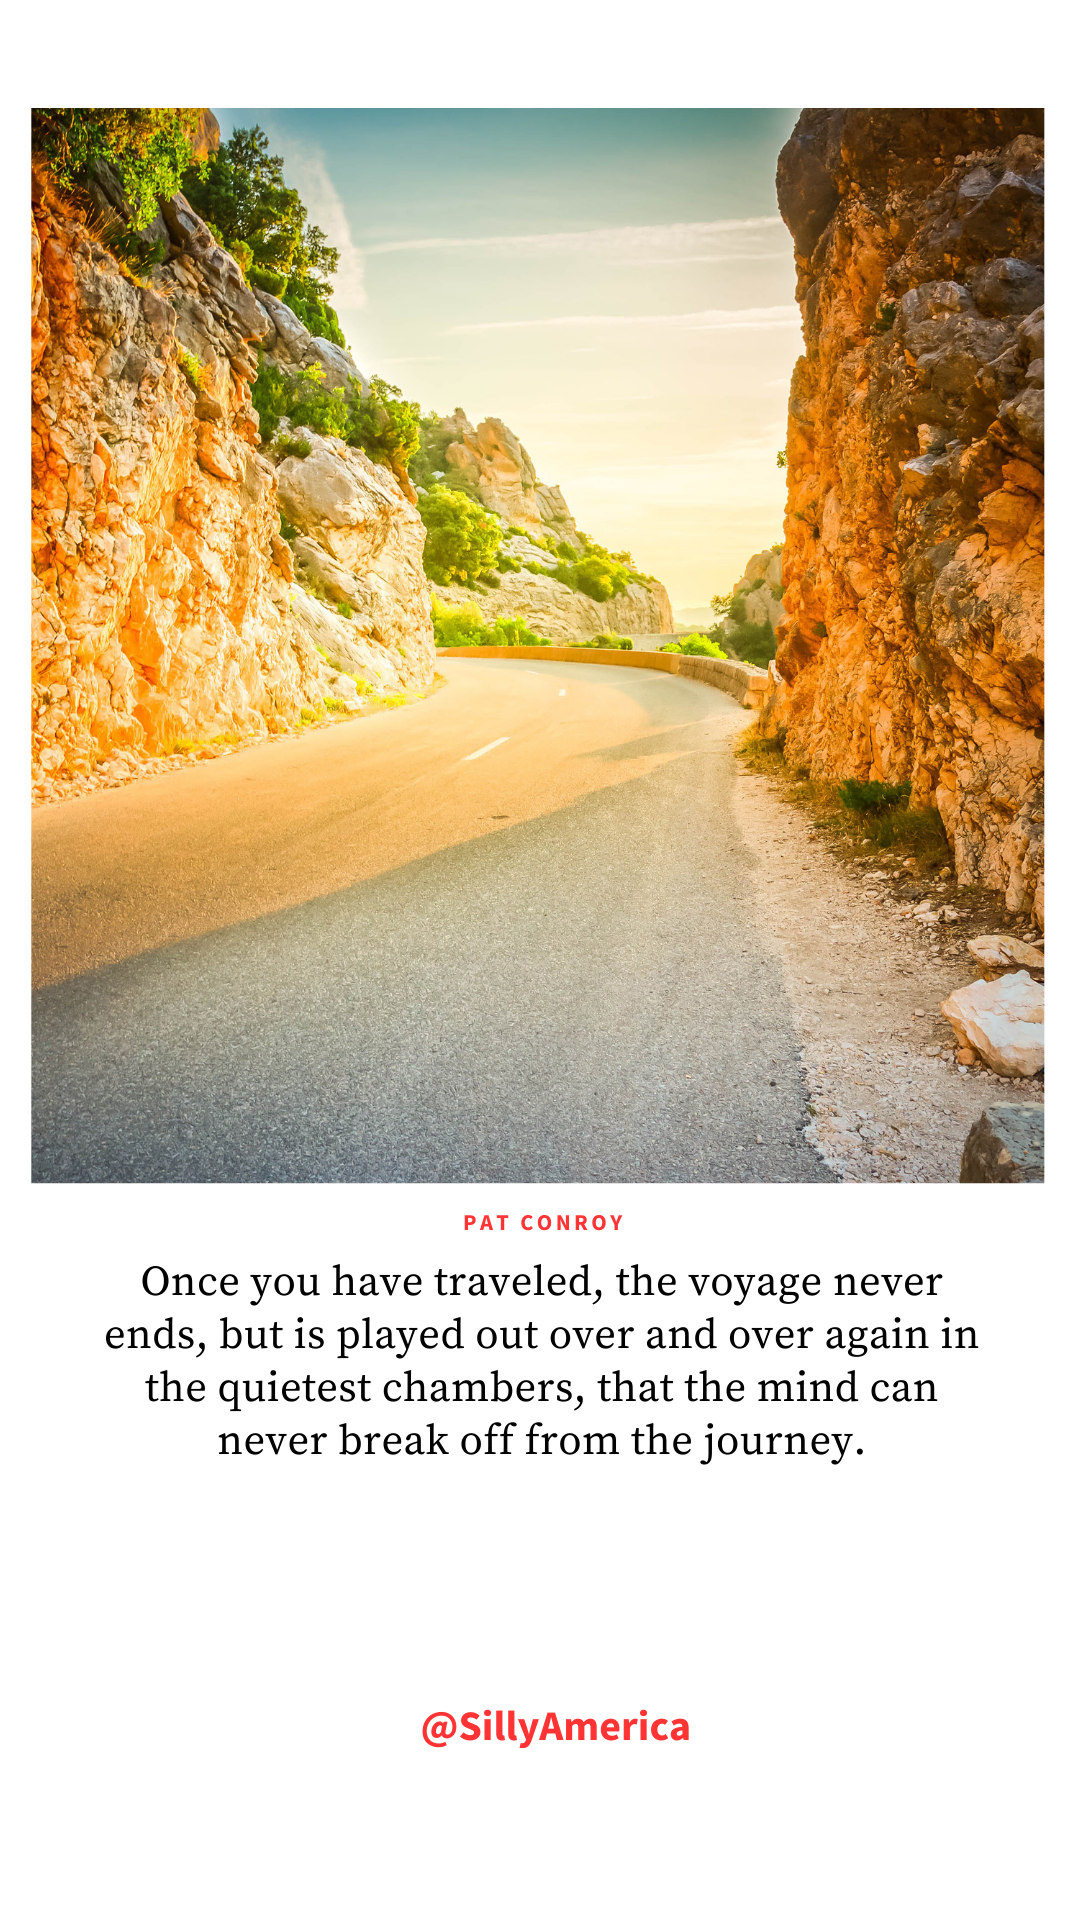 “Once you have traveled, the voyage never ends, but is played out over and over again in the quietest chambers, that the mind can never break off from the journey.” Pat Conroy, The Prince of Tides